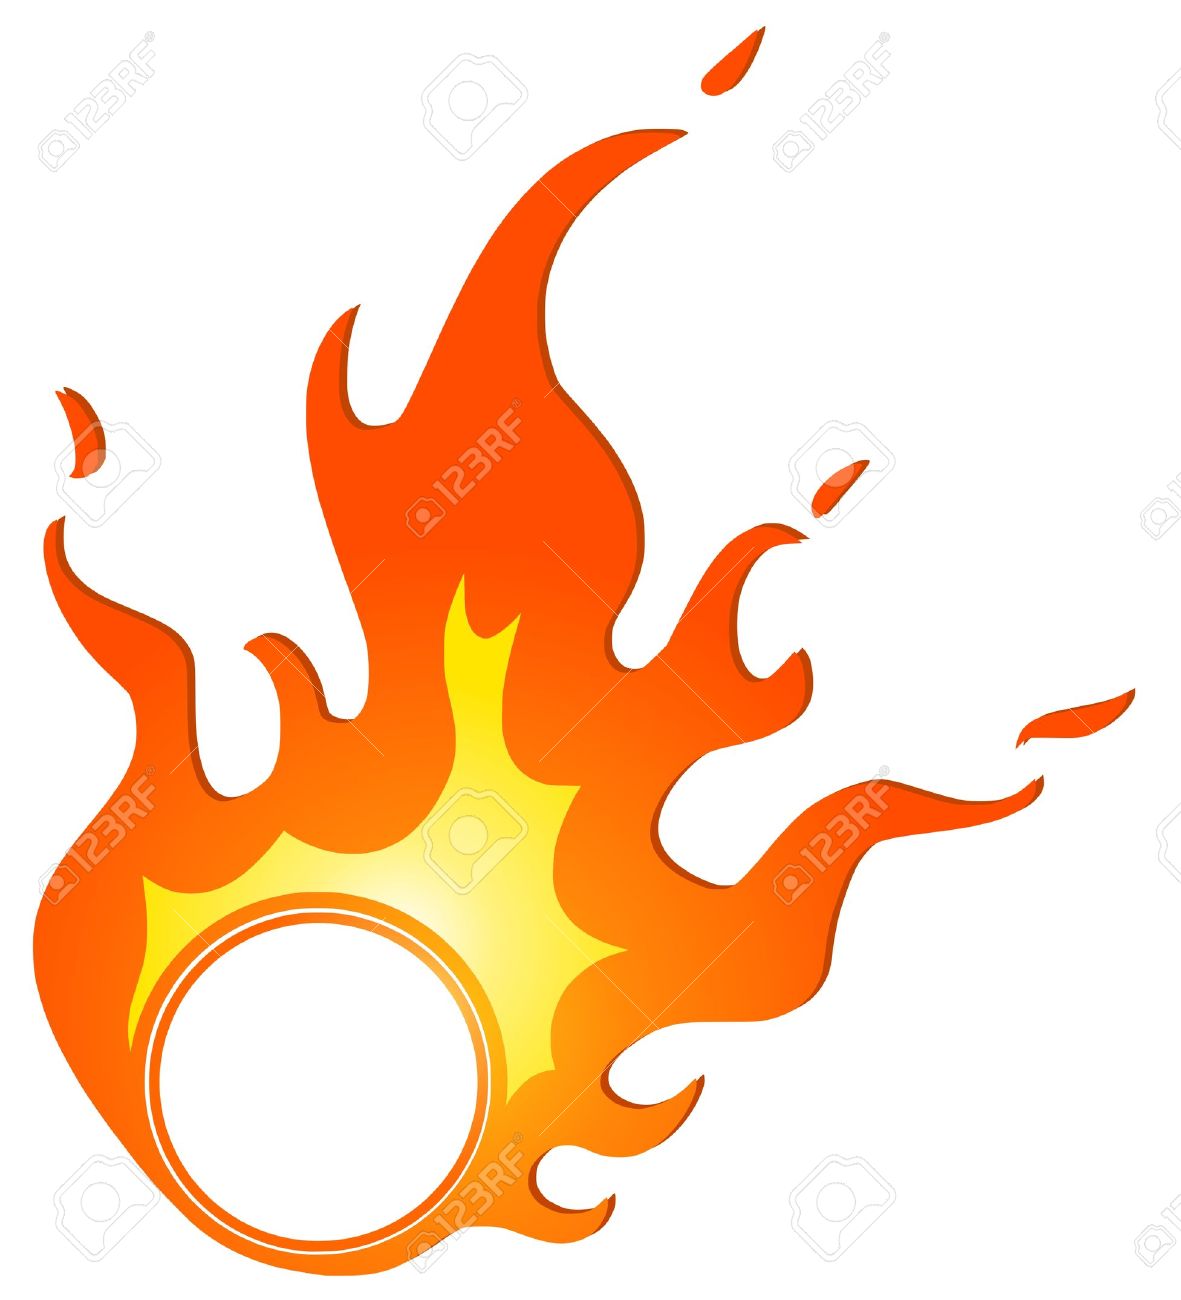 fire burning clipart - photo #18